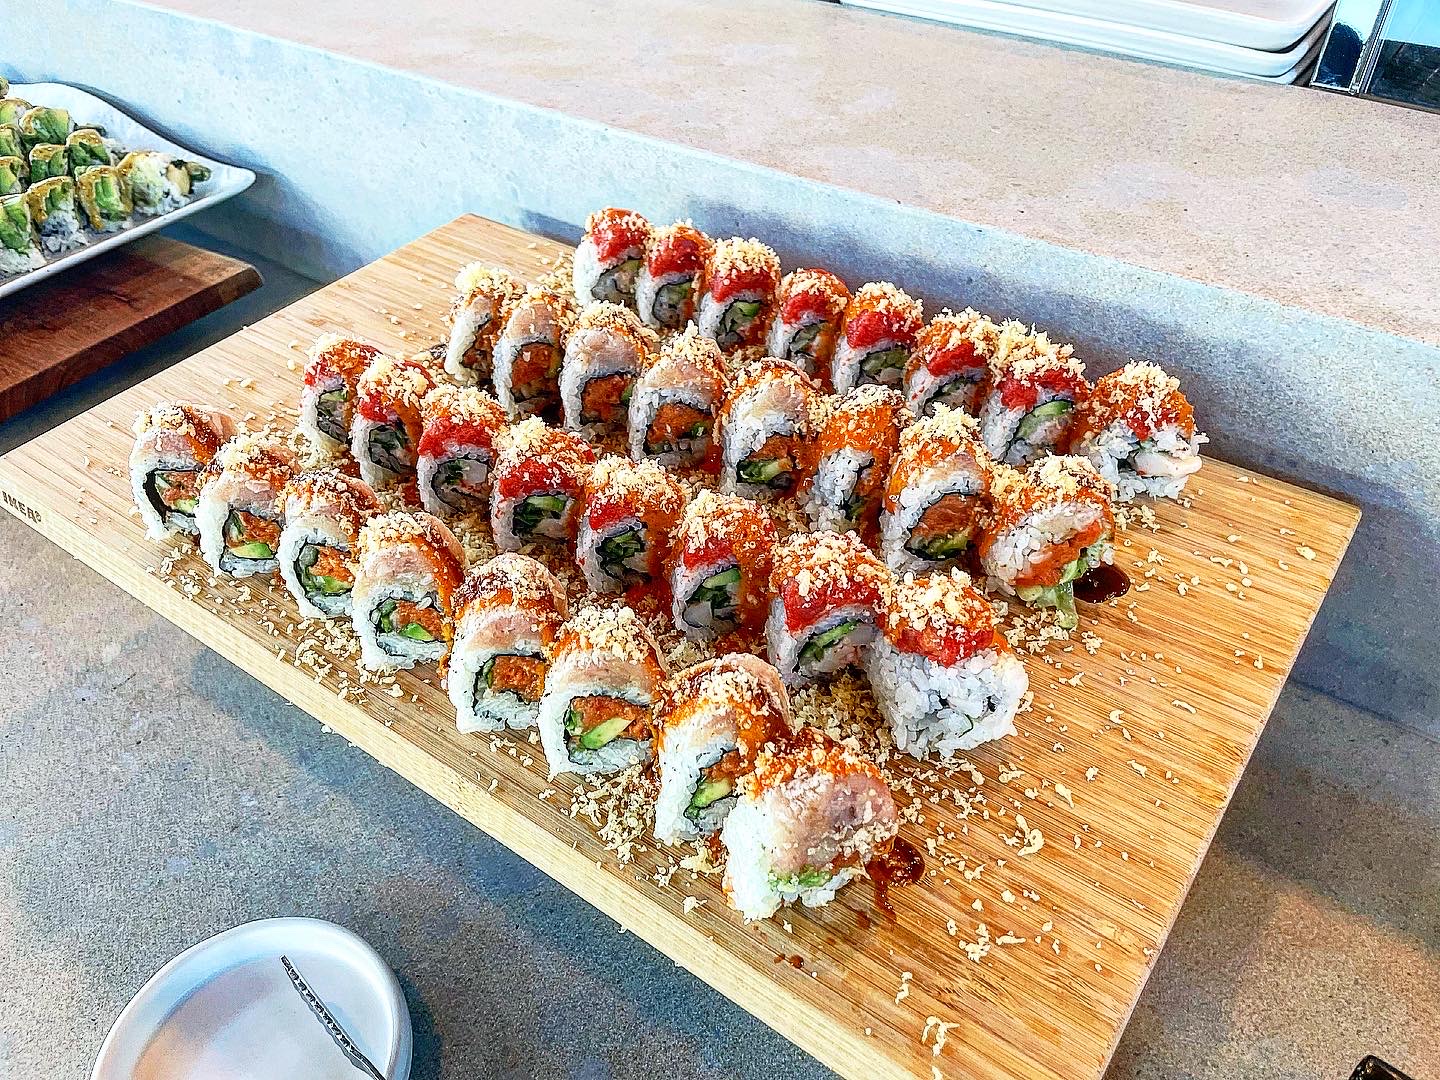 Bamboo Sushi Is Opening Its First Beaverton Location This Week